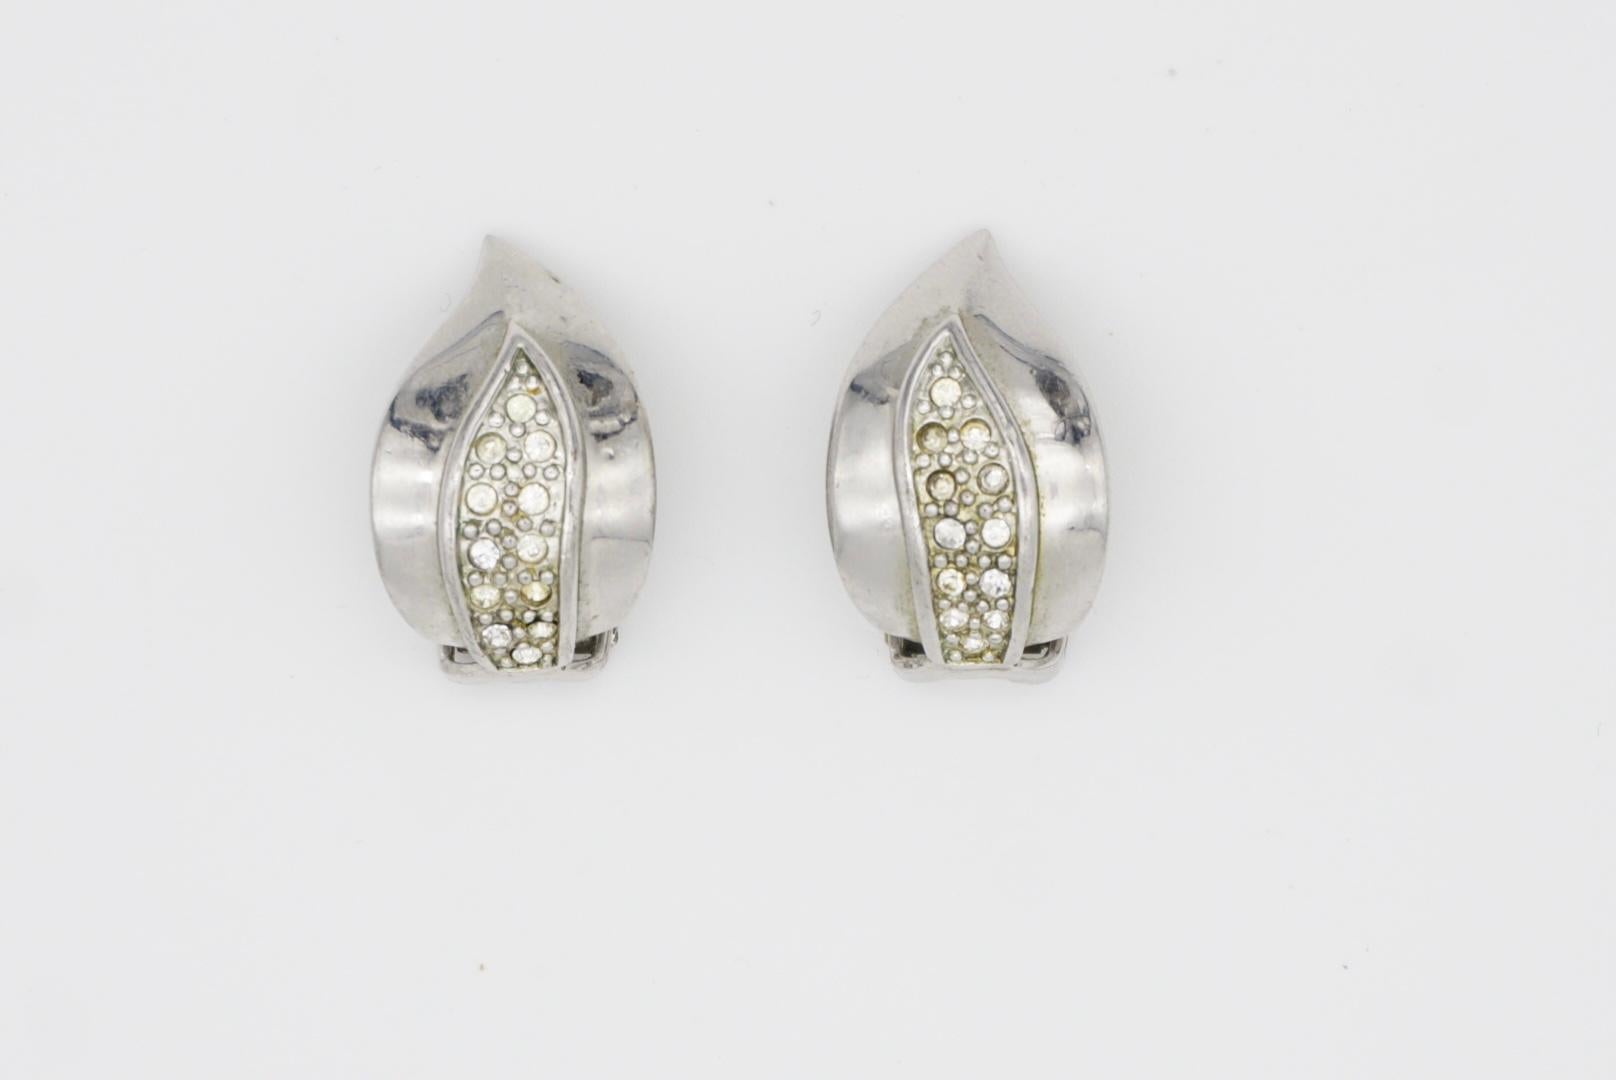 Christian Dior GROSSE 1960s White Crystals Leaf Fire Retro Silver Clip Earrings 2